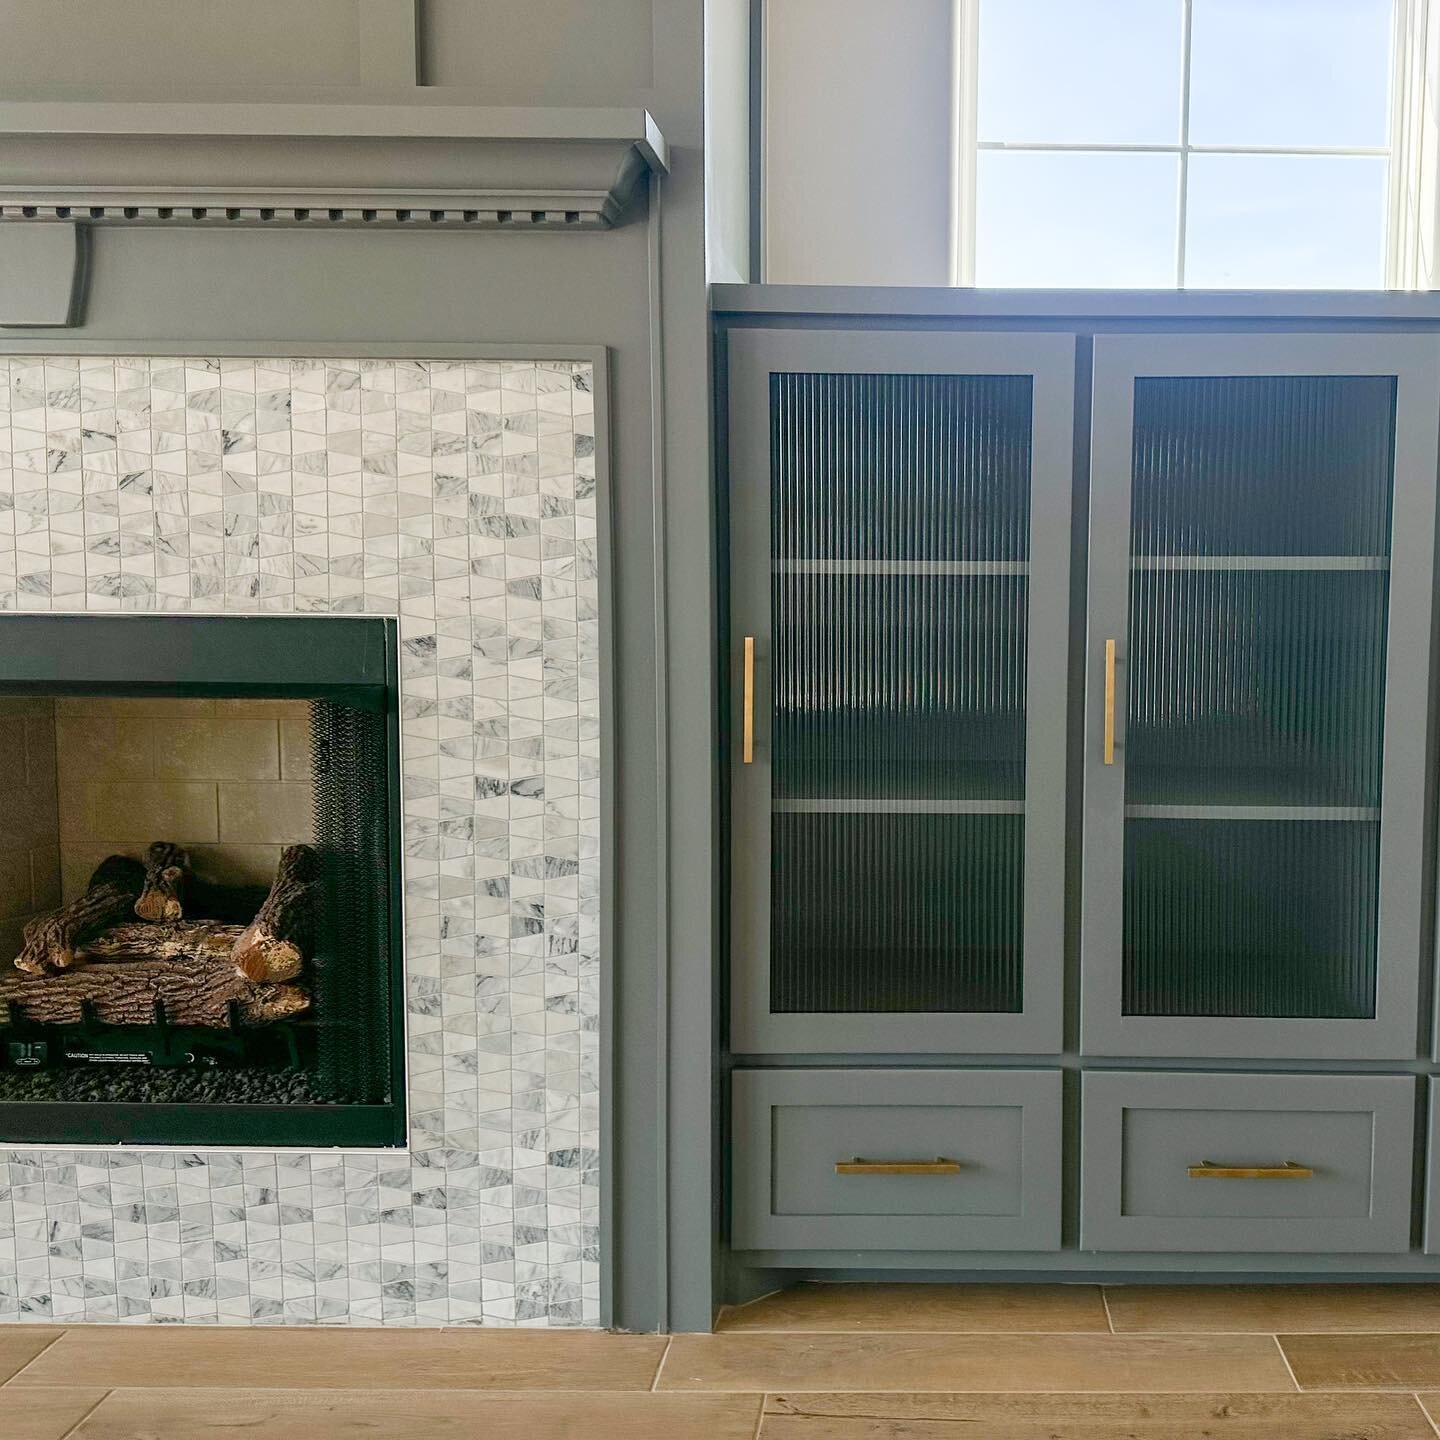 Still obsessing over this fireplace! 

One of our goals when designing home interiors is to add timeless details. Here we have beautiful marble tile, handmade dentil moulding, reeded glass, and paint from @sherwinwilliams historical collection. 

#ho